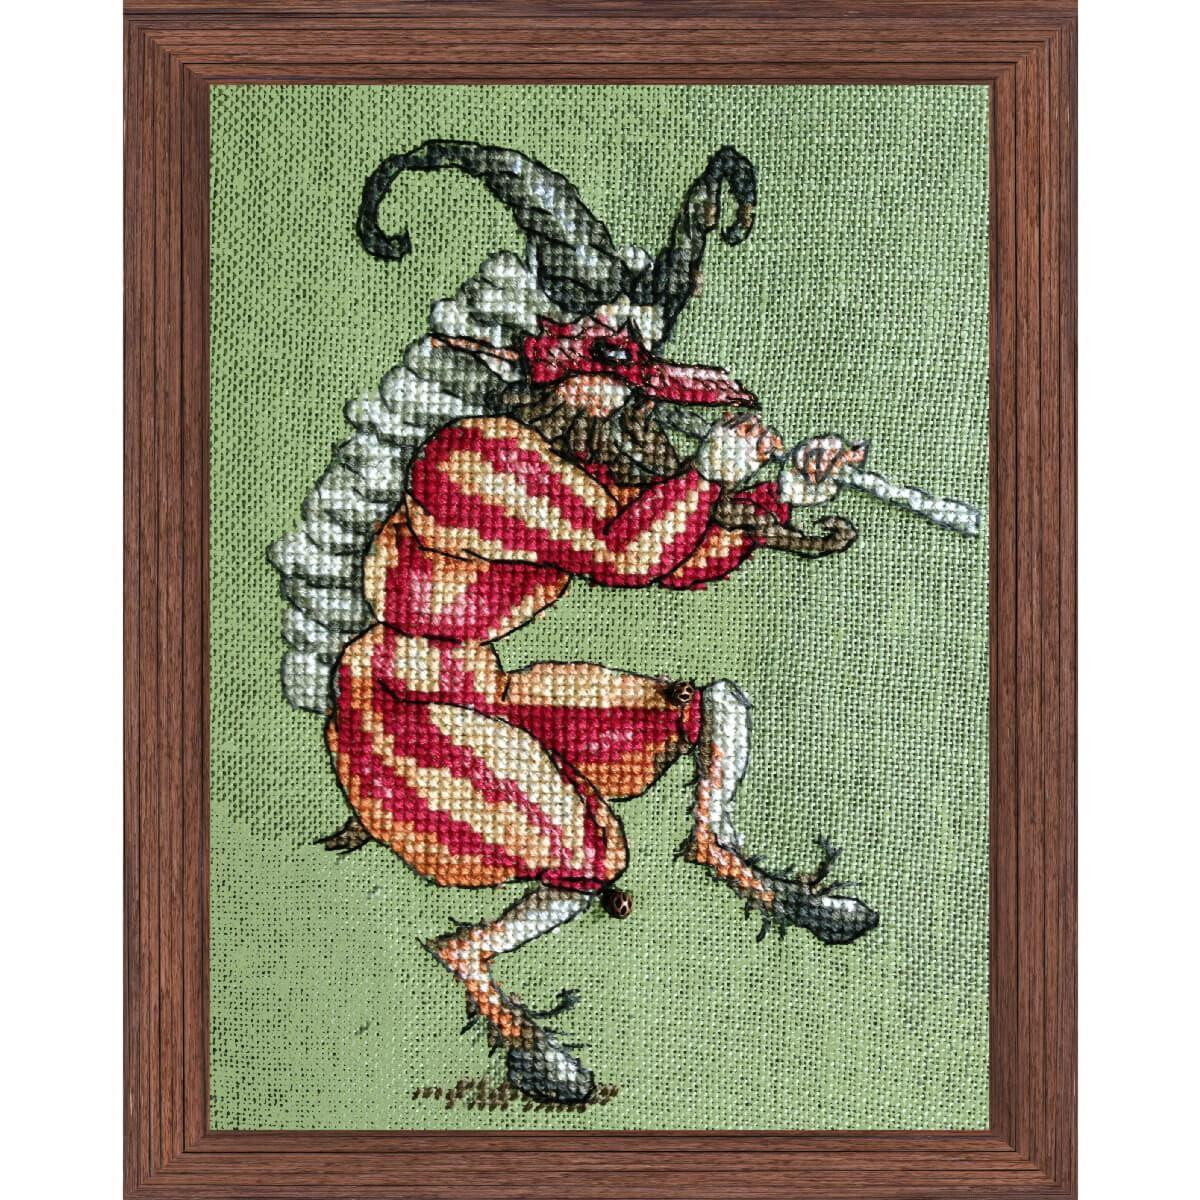 Nimue Cross Stitch counted Chart "The Faune of...